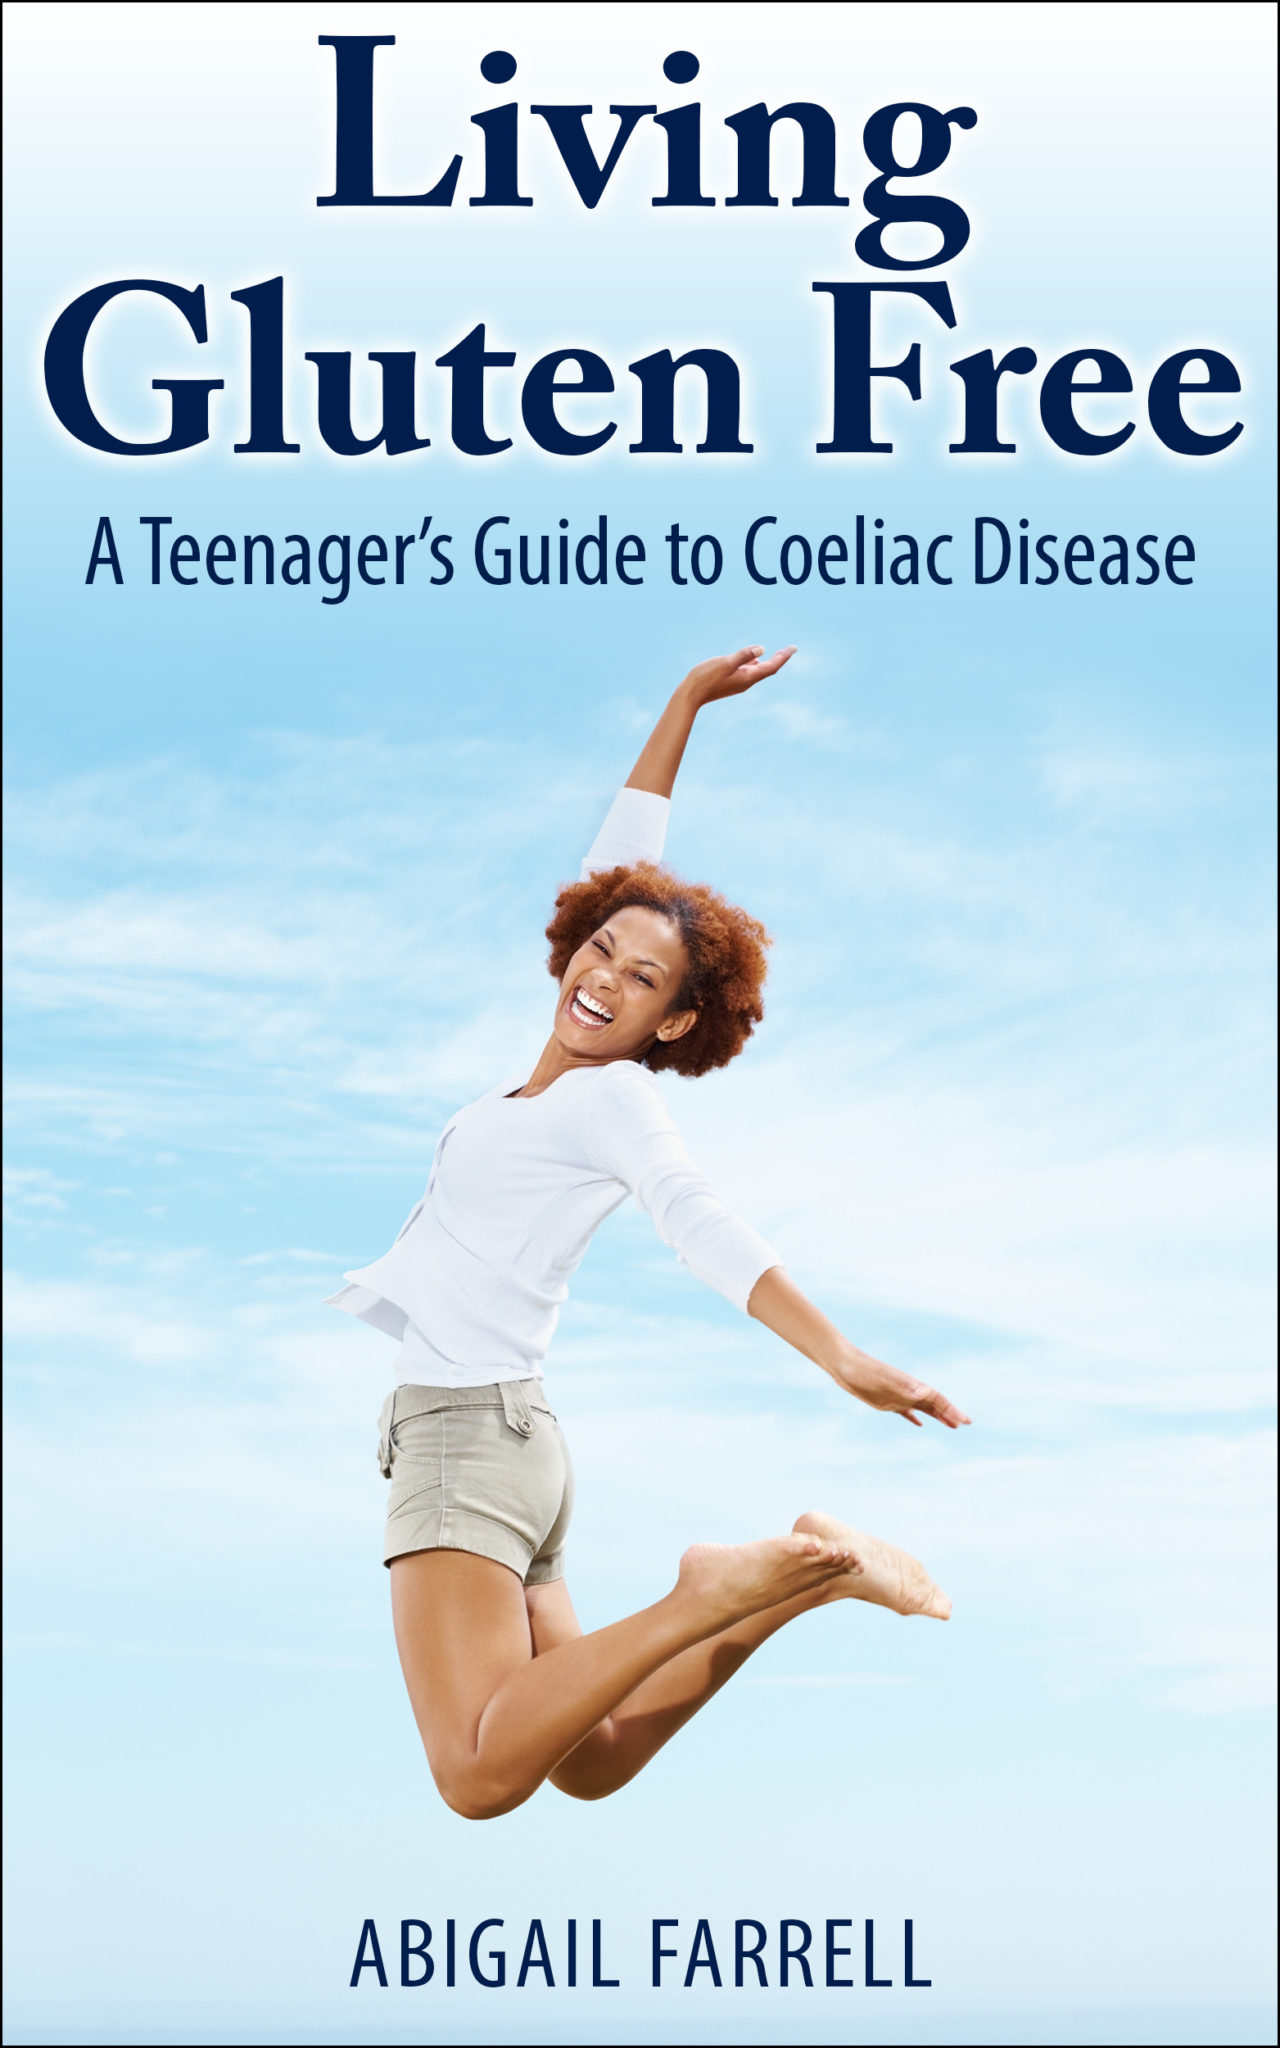 Living Gluten Free – A Teenager’s Guide to Coeliac Disease by Abigail Farrell